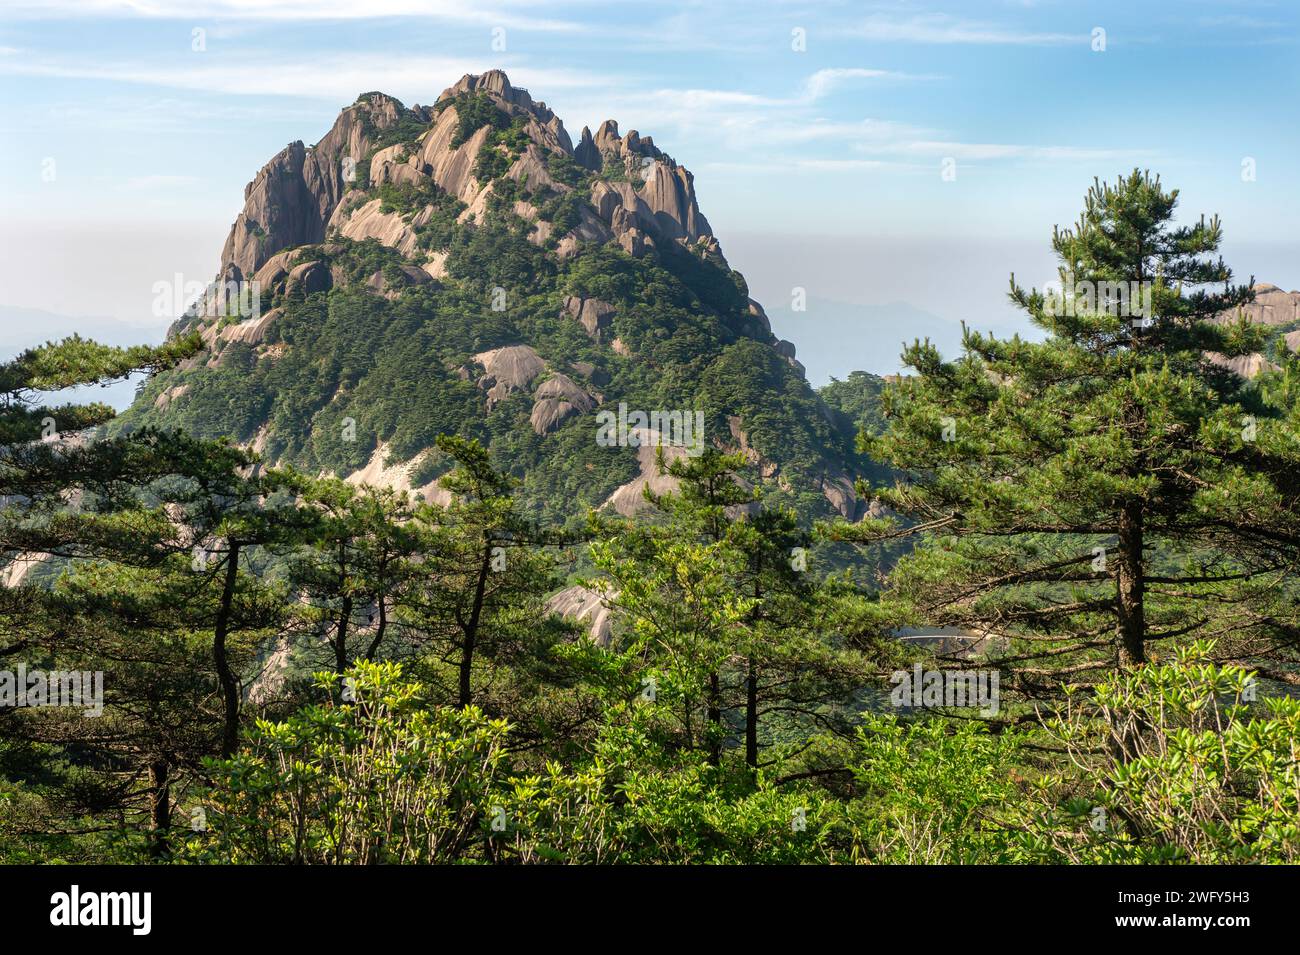 Lotus Peak, also known as Lianhua Feng, stands at 6,115 feet as the tallest summit in the Huangshan mountain range in China. The peak has been referen Stock Photo